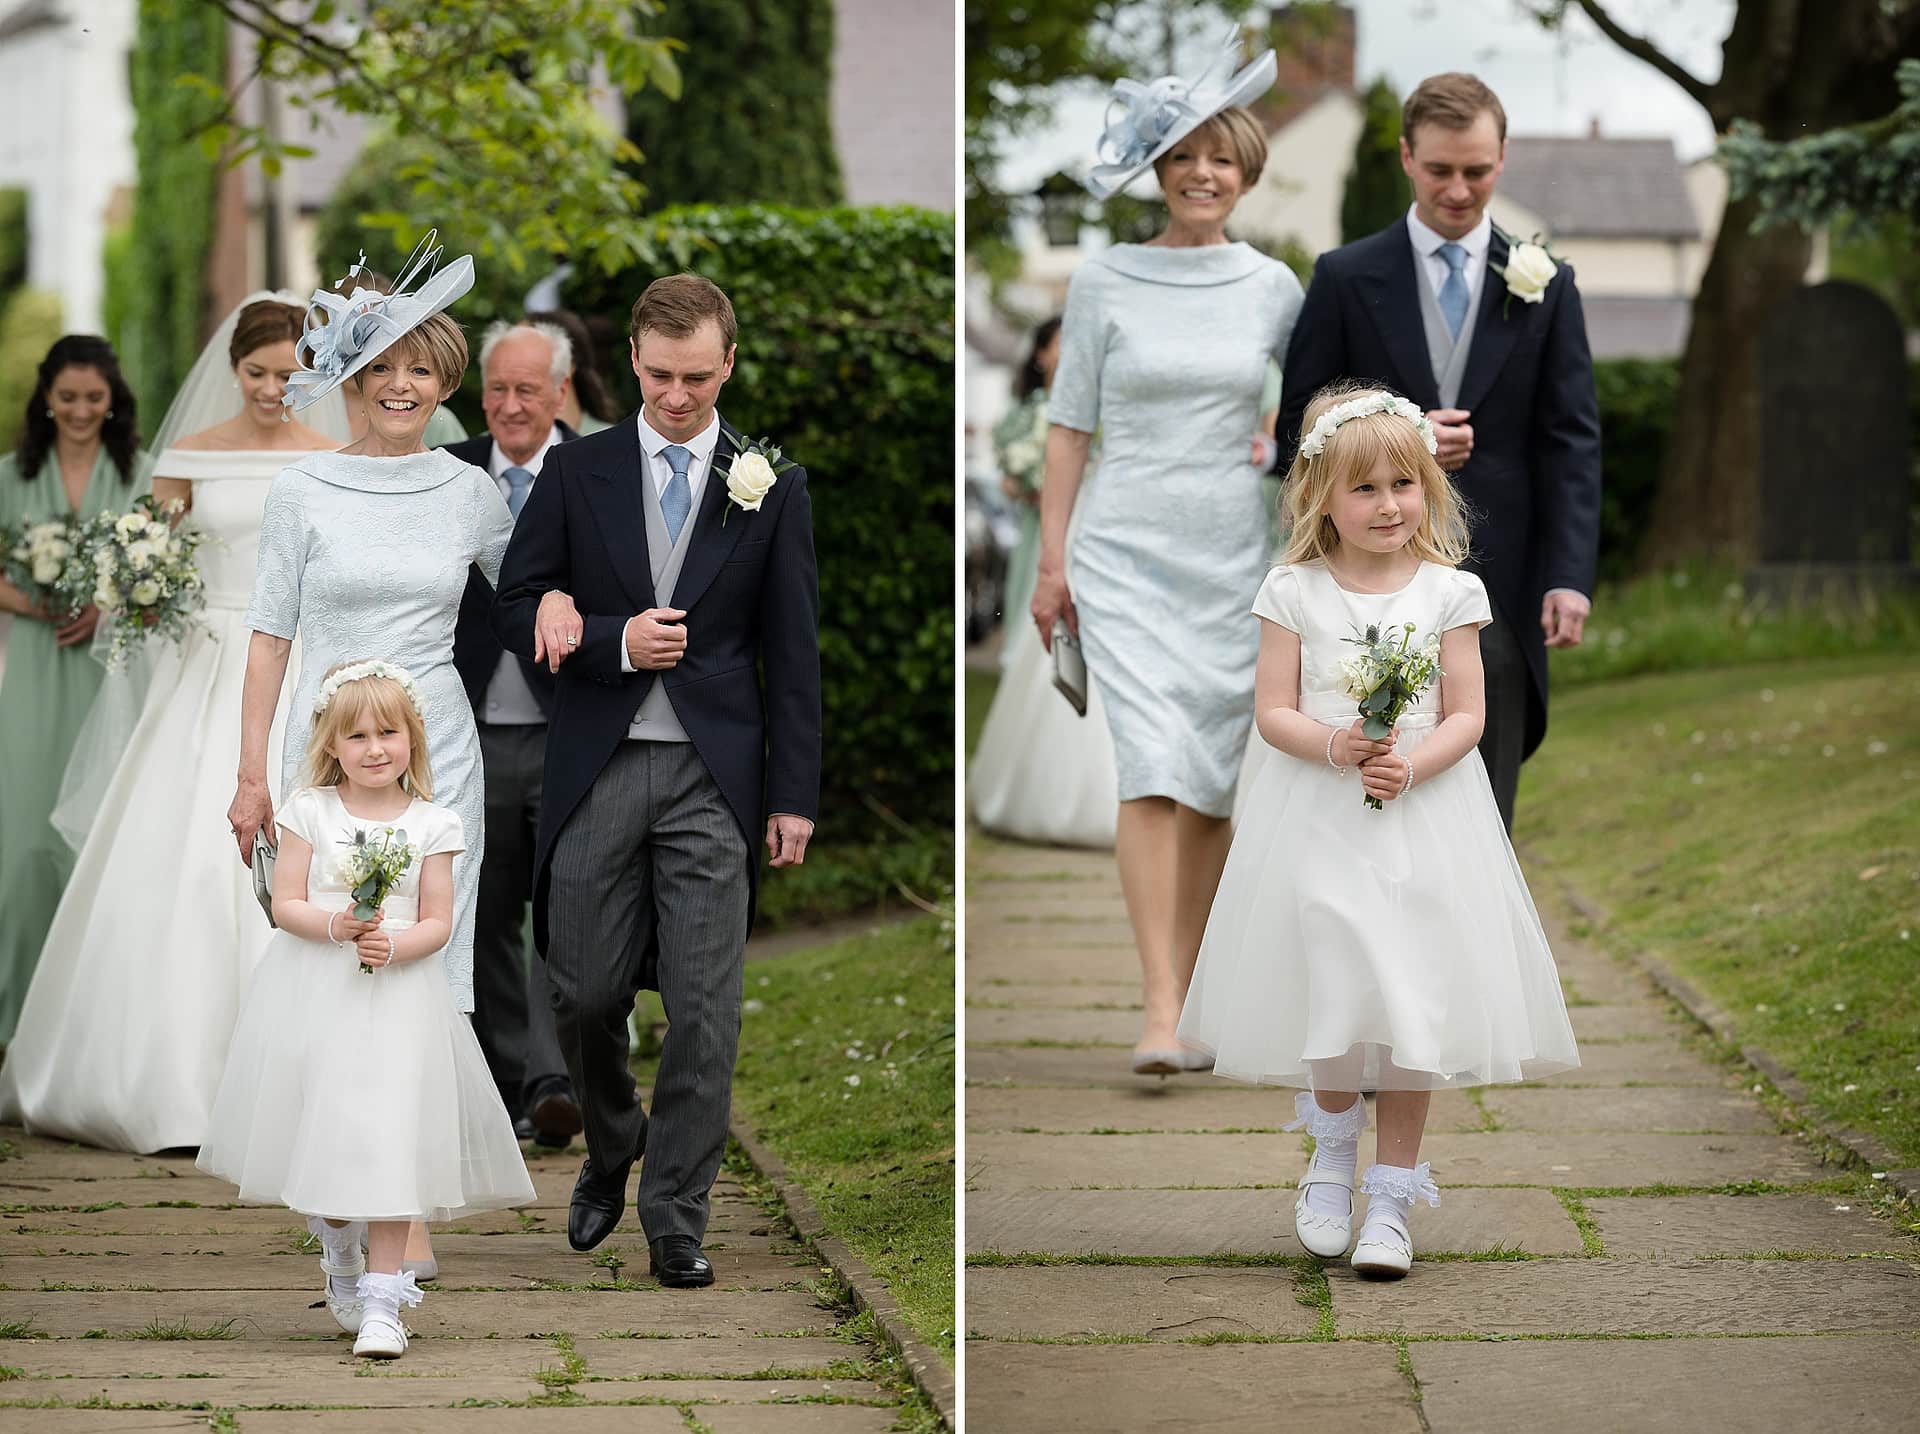 A flower girl and the bride's mum and brother walking down the church path